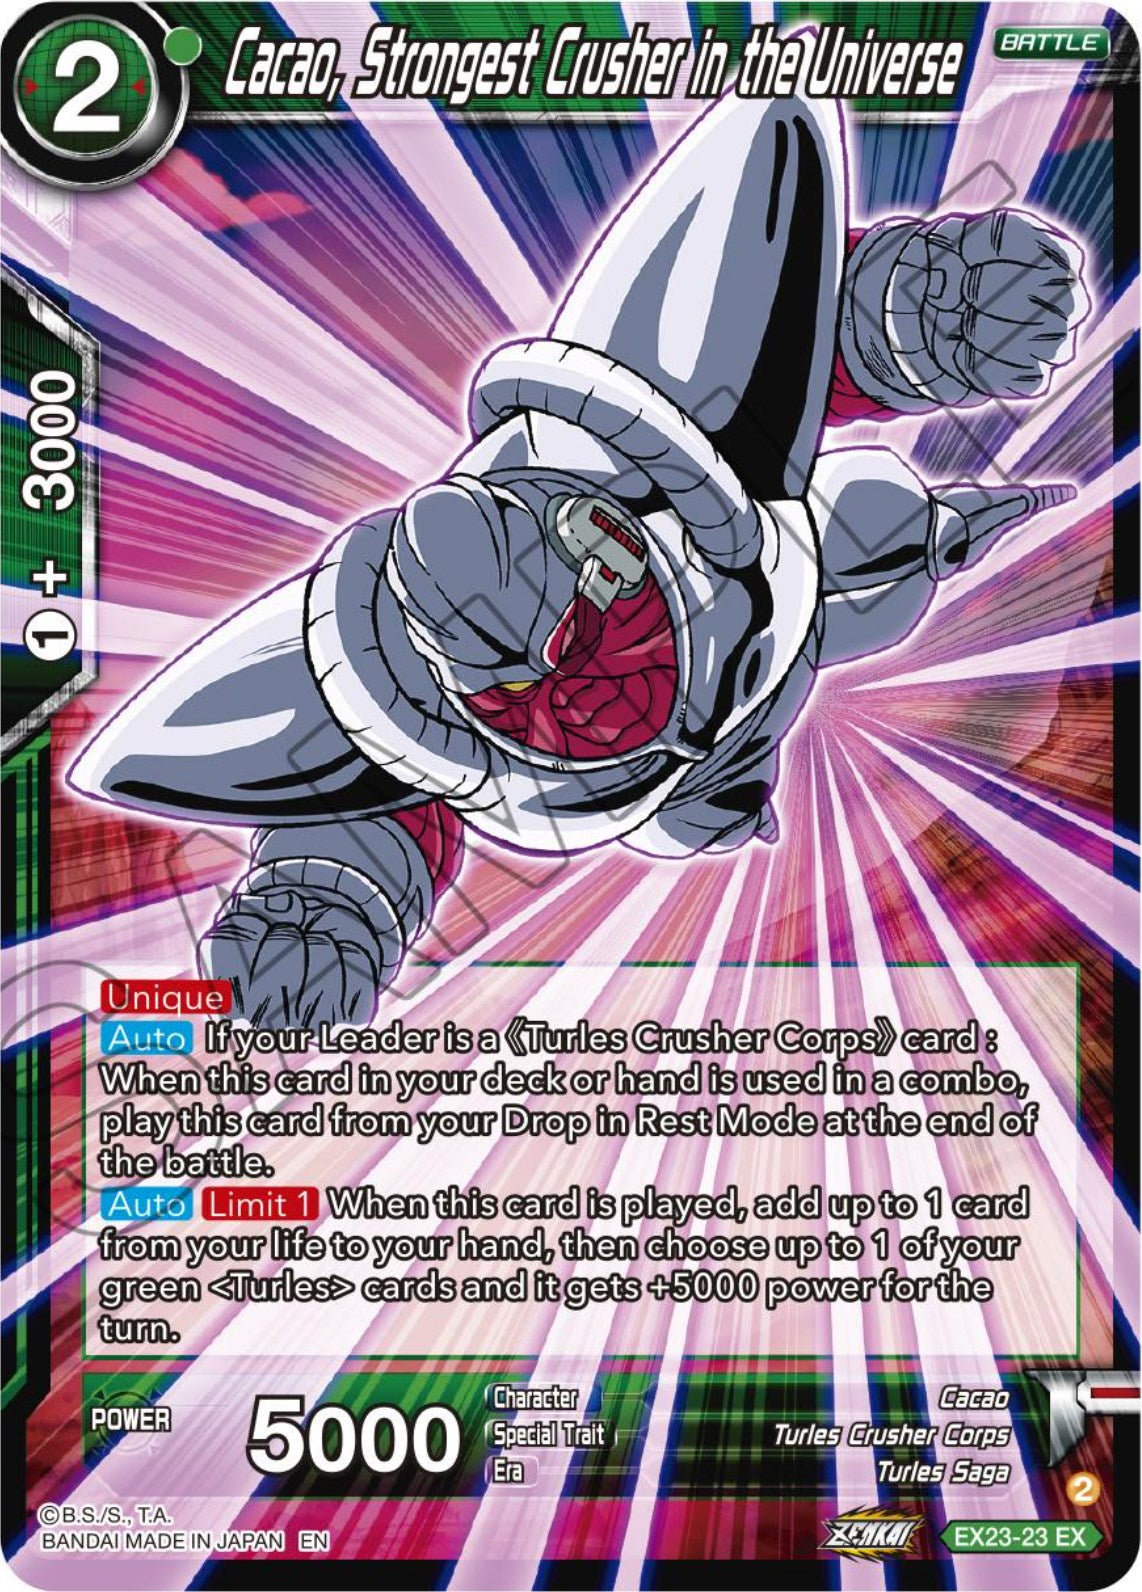 Cacao, Strongest Crusher in the Universe (EX23-23) [Premium Anniversary Box 2023] | Shuffle n Cut Hobbies & Games